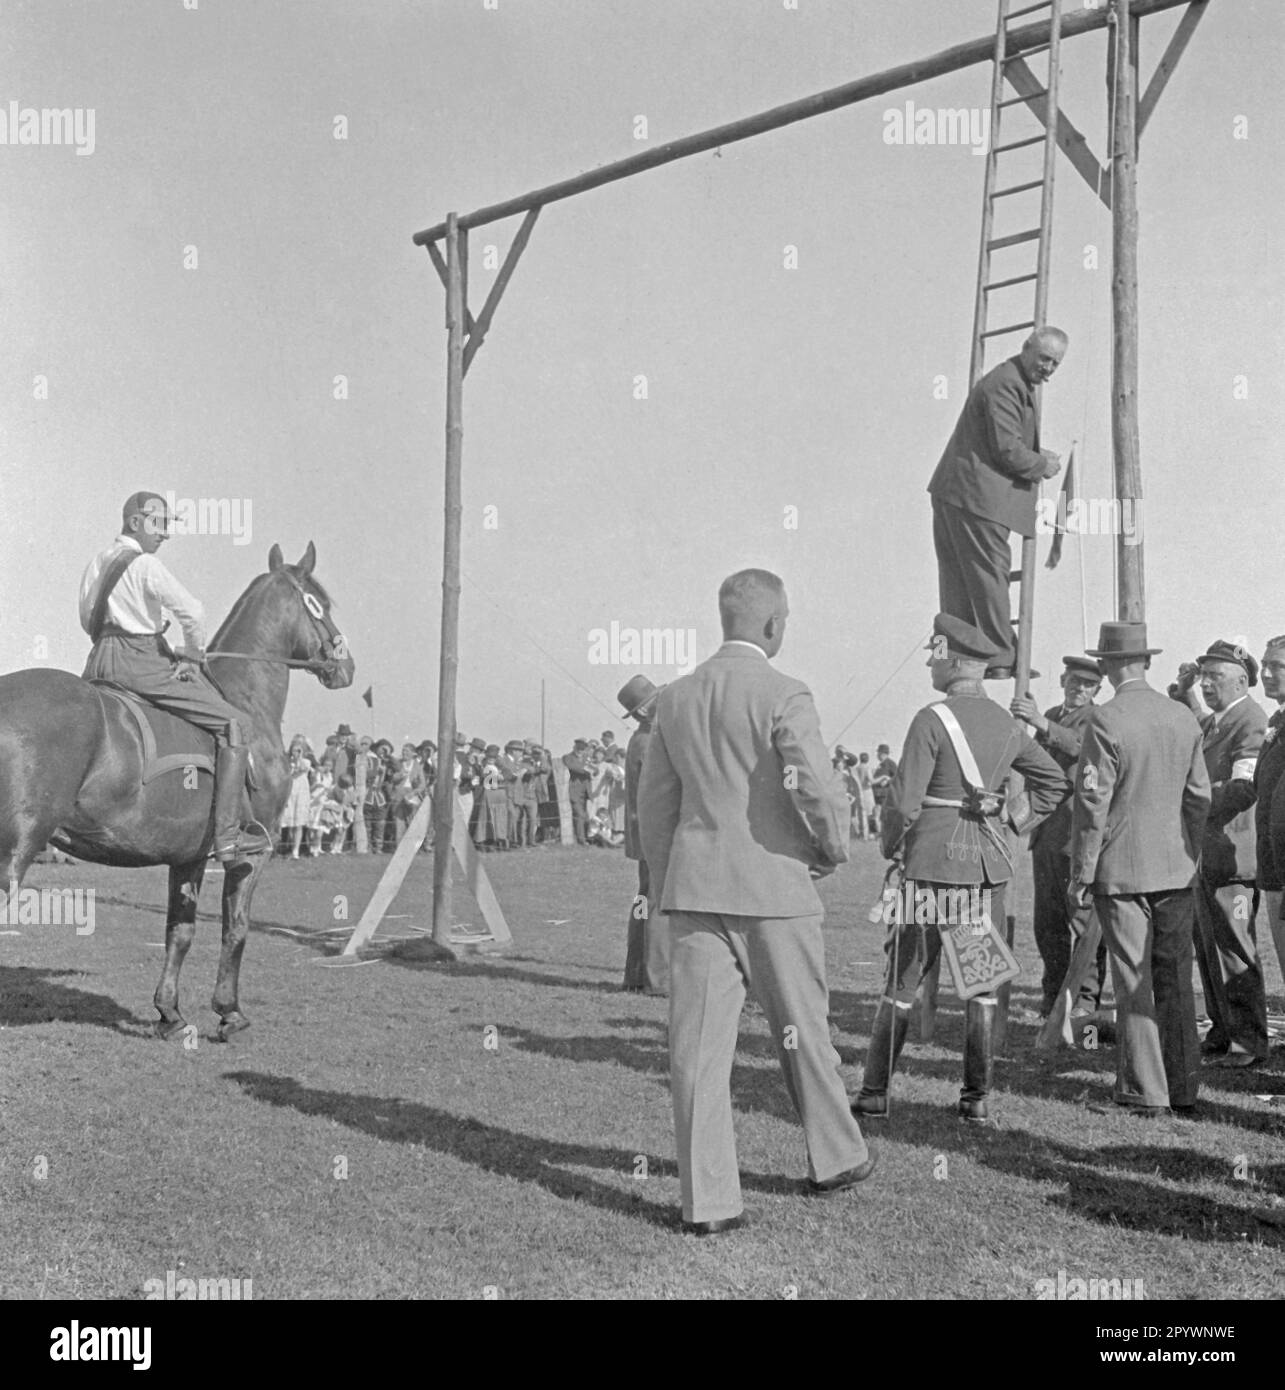 Ring riding in Warnemünde. In ring riding, a lance is put through a ring hanging from a scaffold. Among the spectators is a man in Prussian uniform. Stock Photo